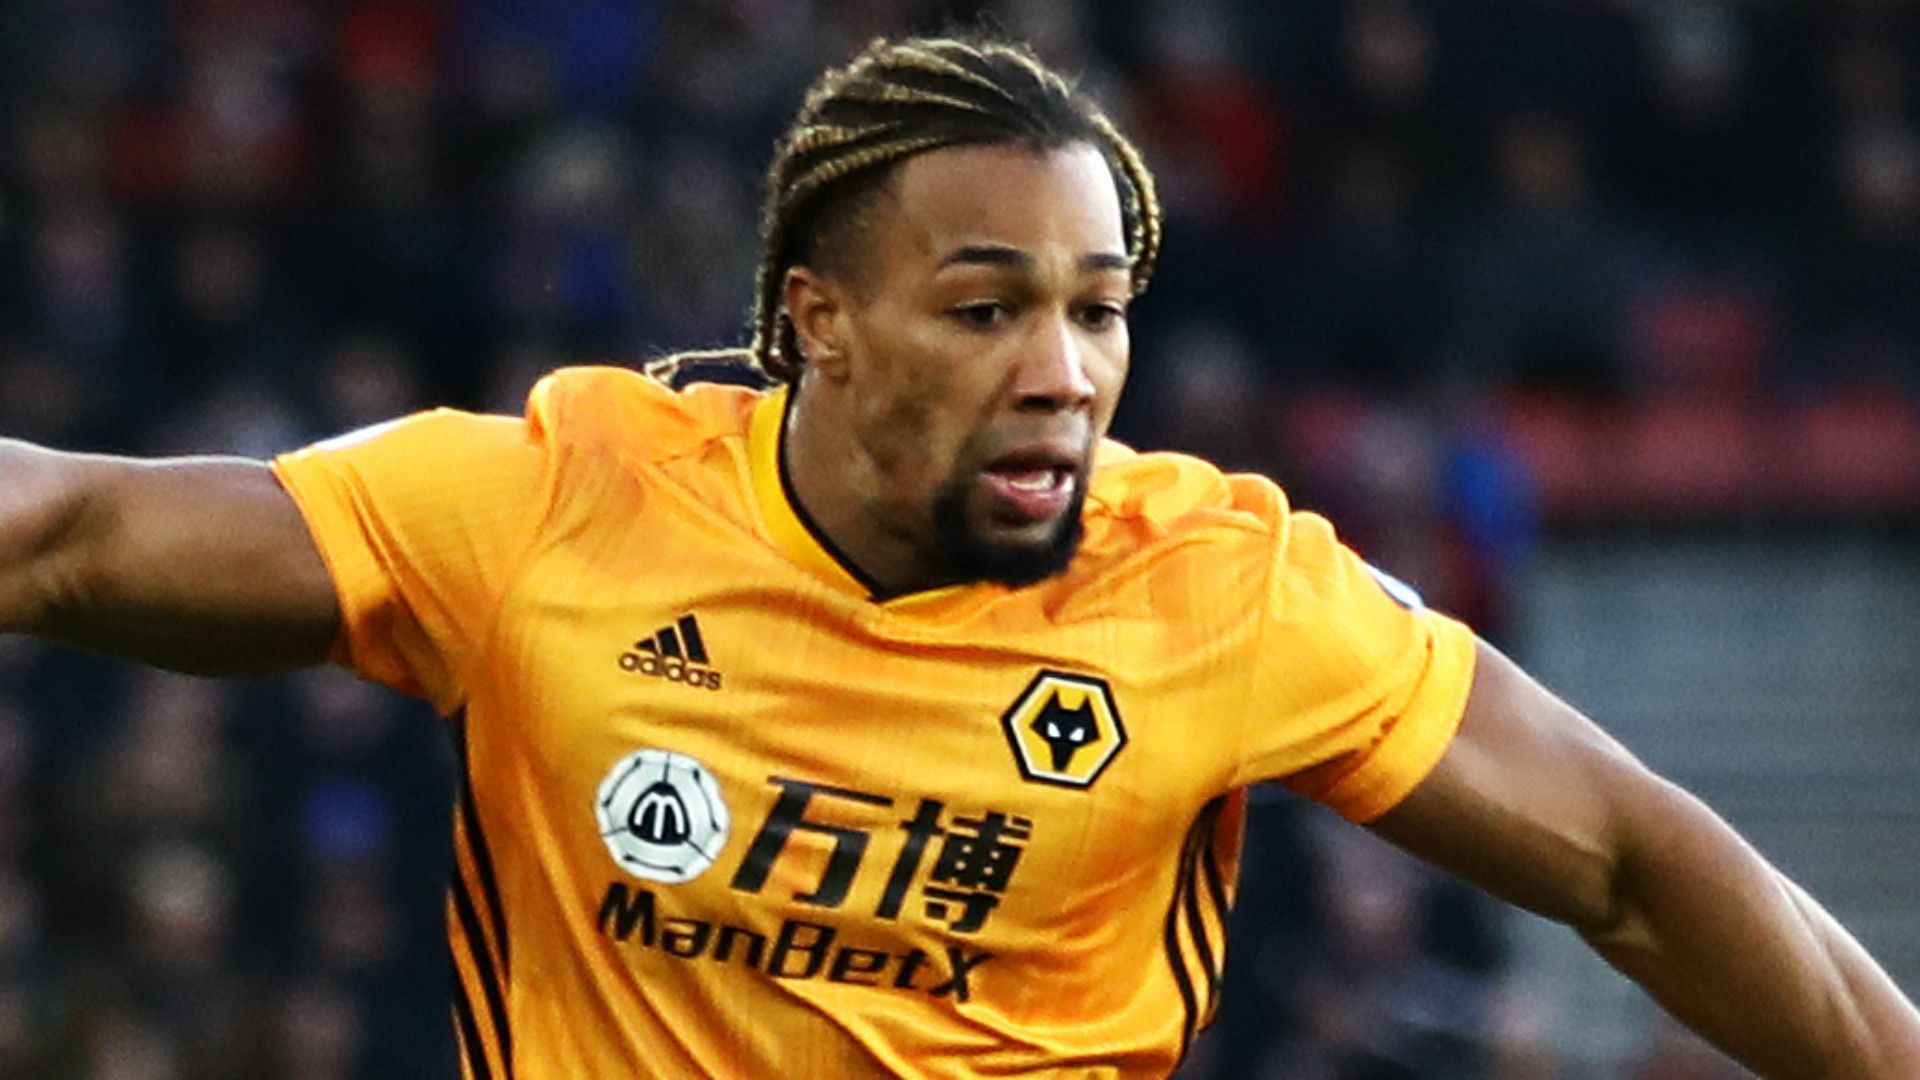 Kanoute plans to convince Adama Traore to ditch Spain for Mali